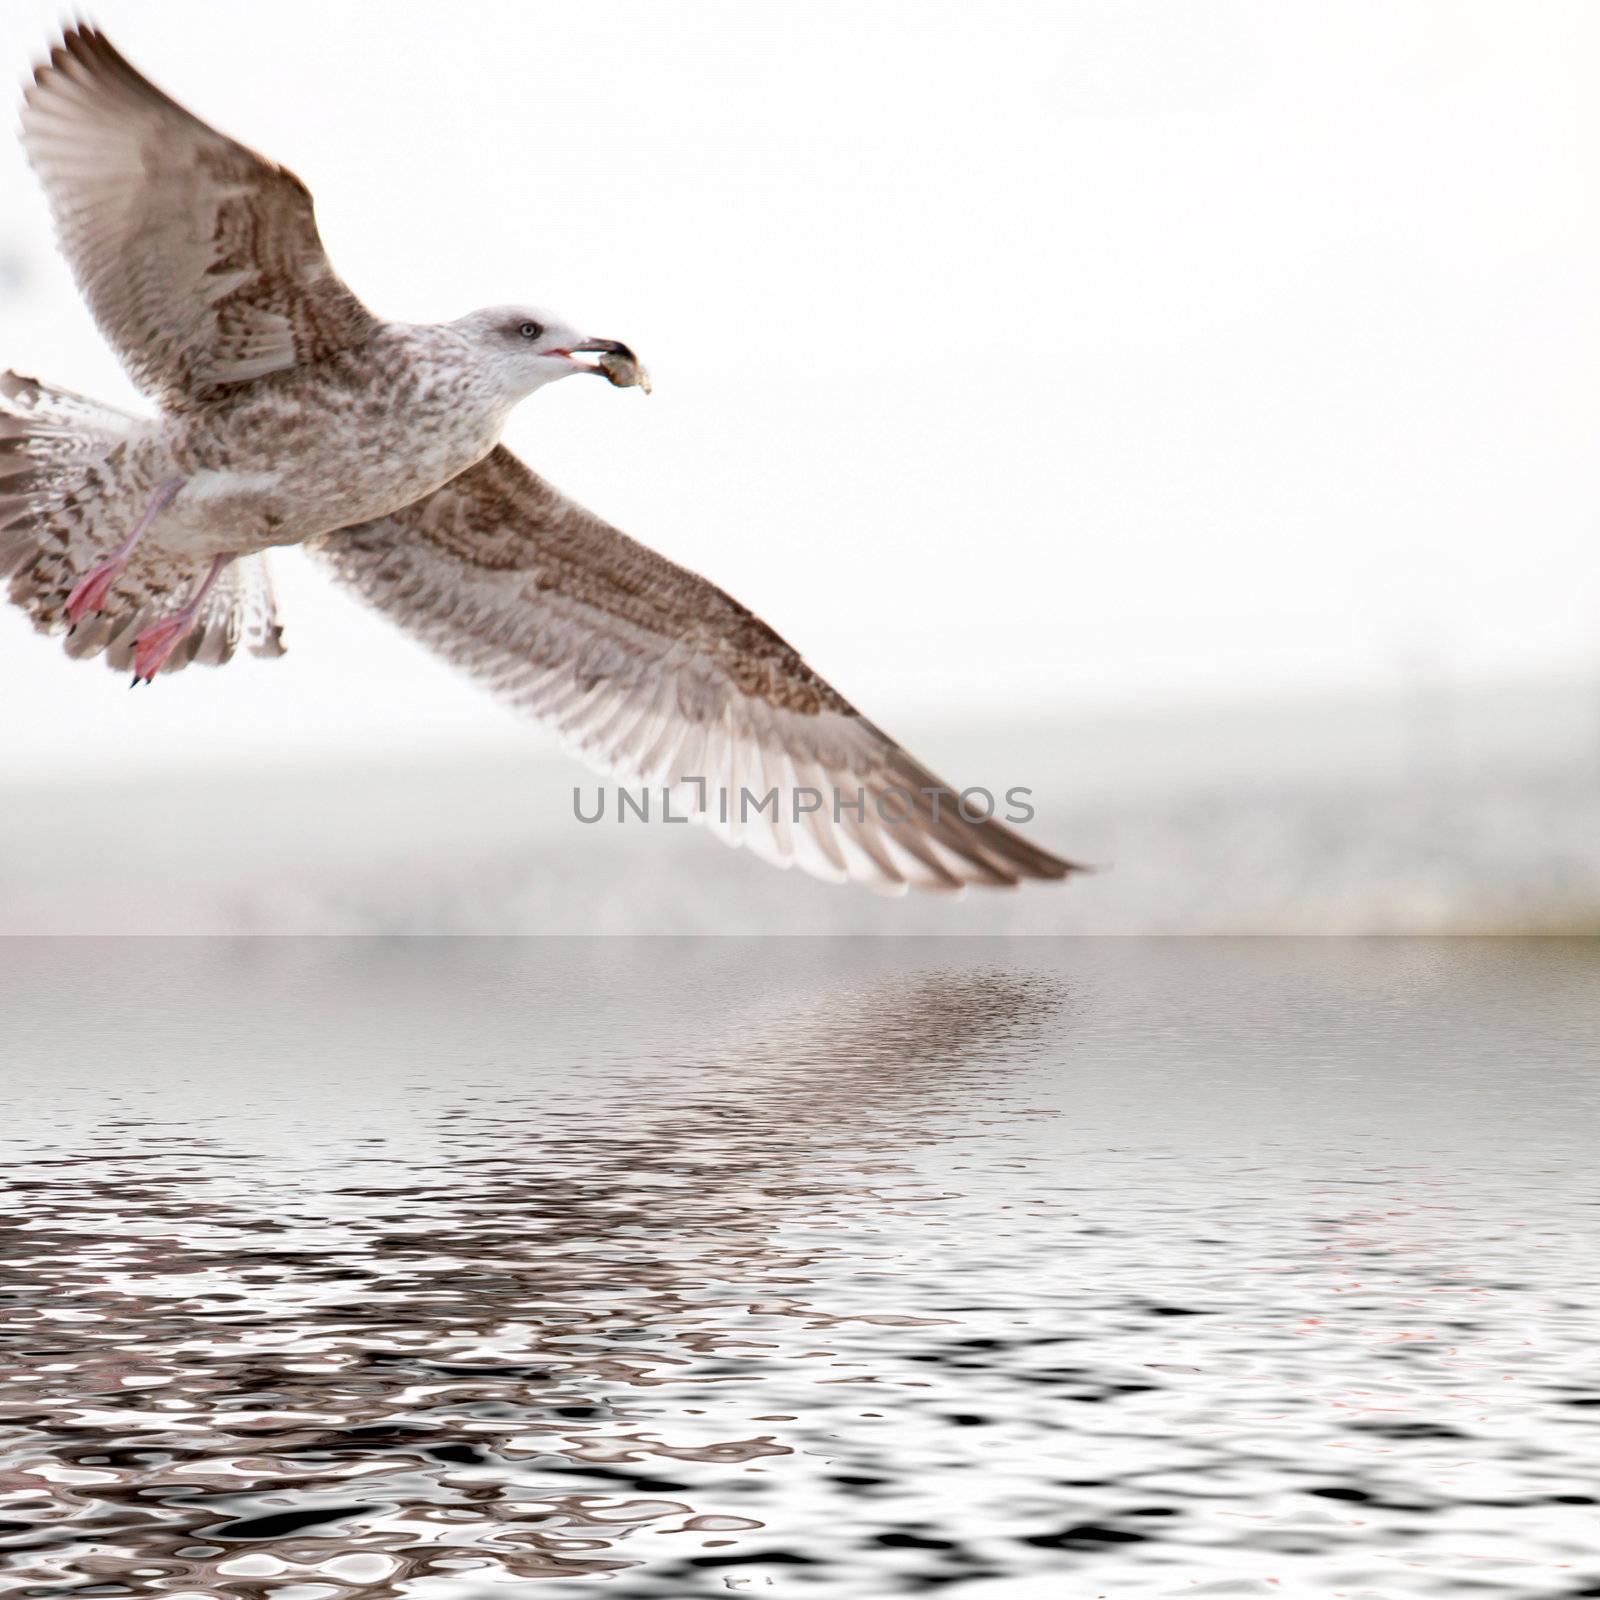 a bird of prey with prey in flight over water by Farina6000